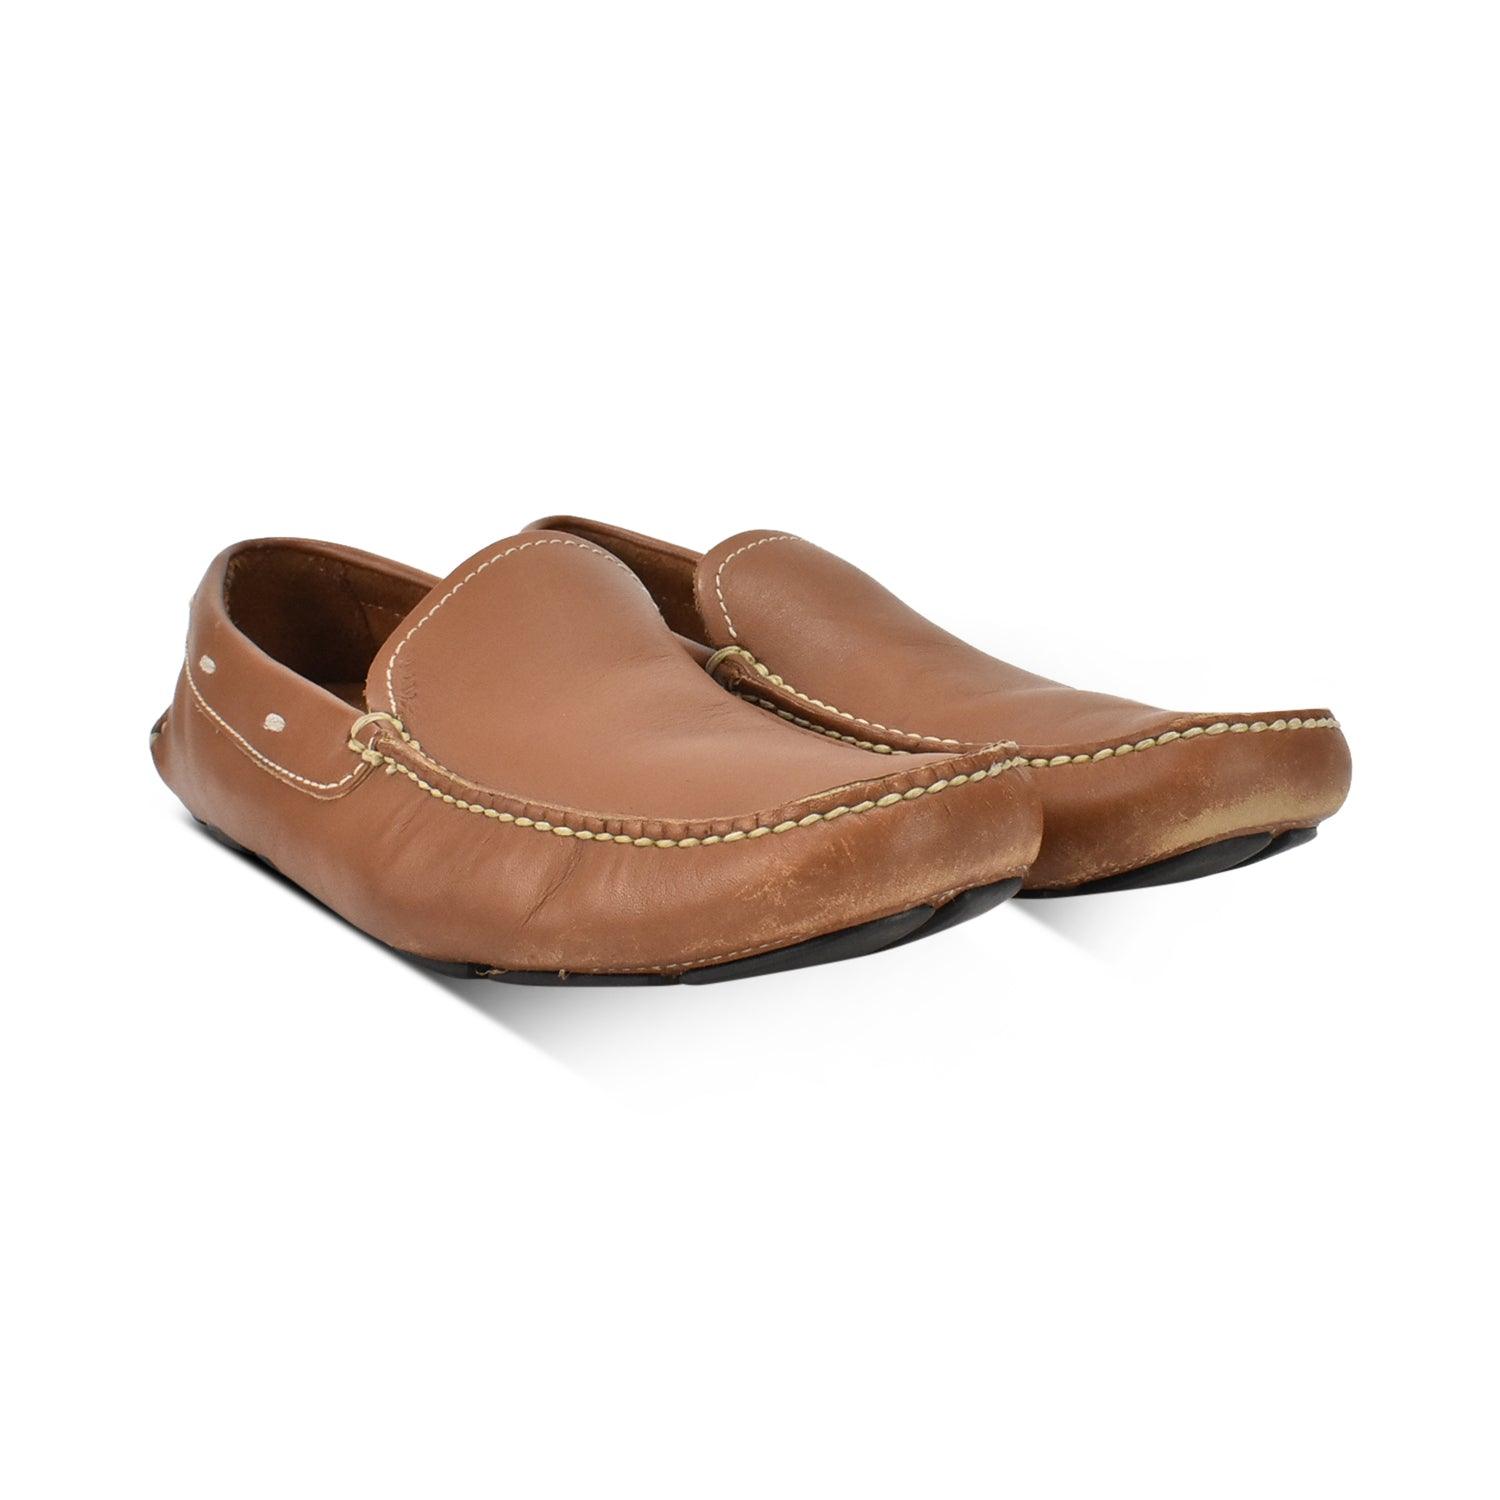 Prada Loafers - Men's 9 - Fashionably Yours